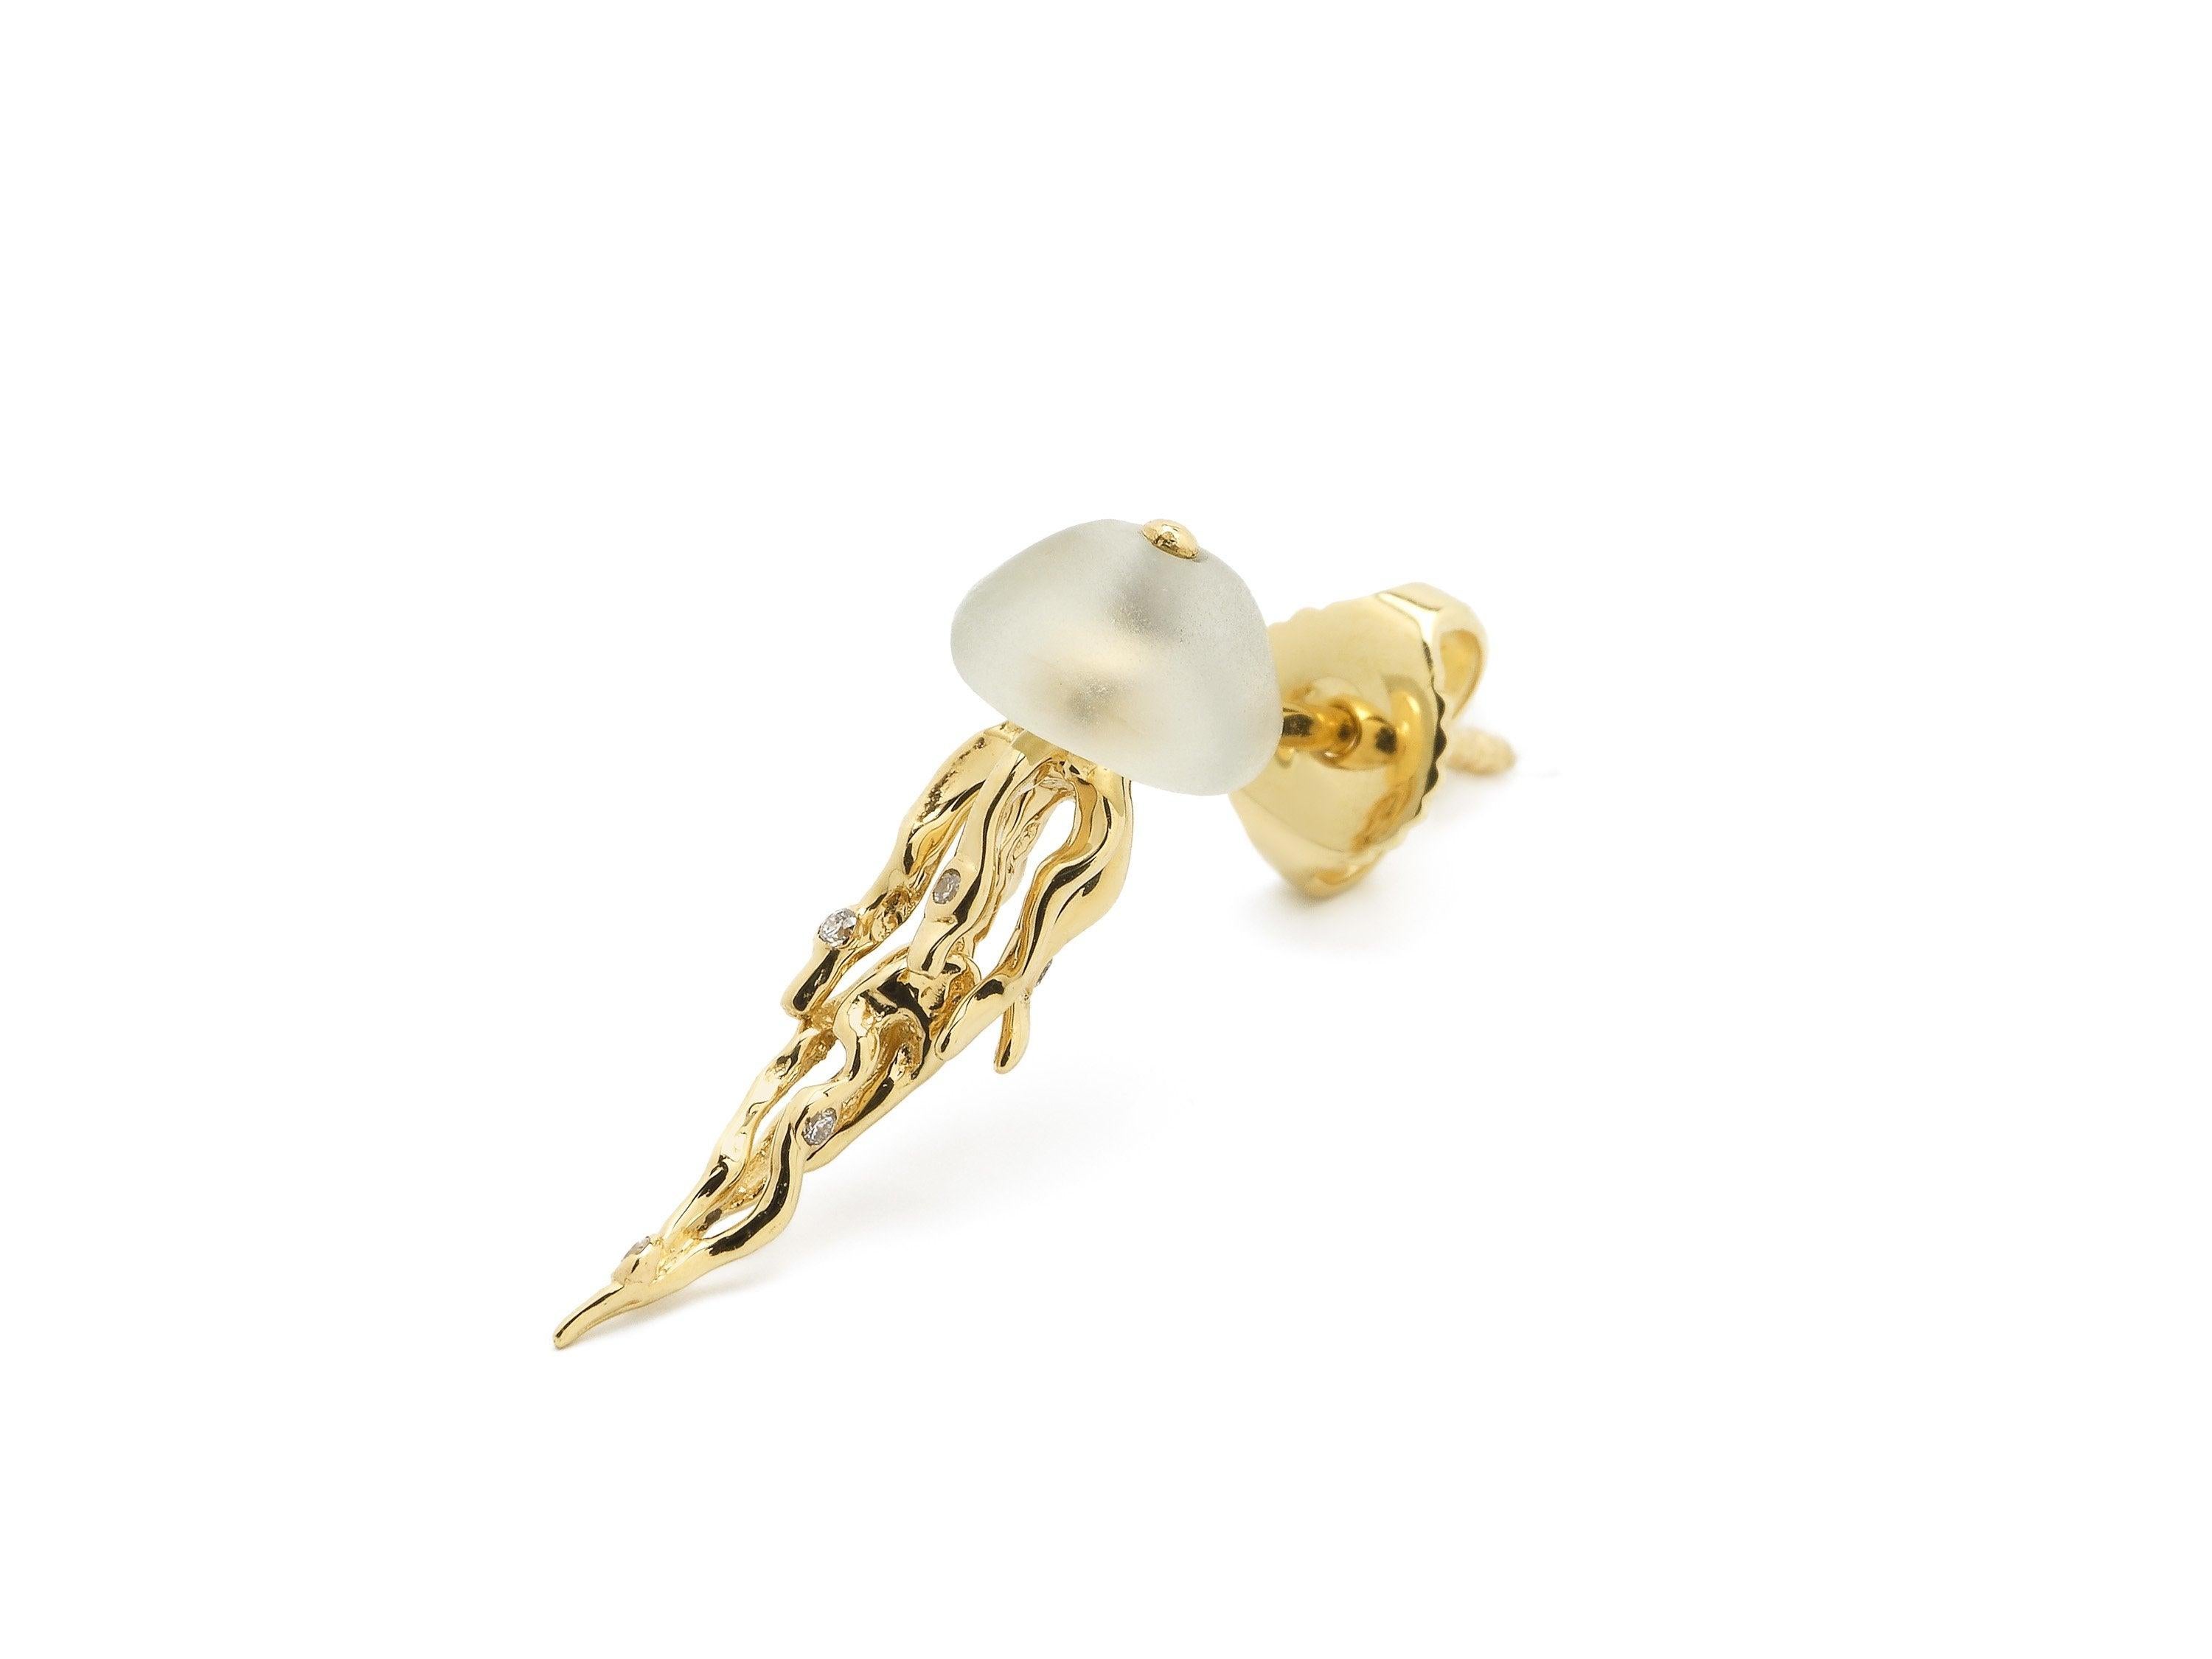 This stud earring captures a jellyfish’s graceful, instinctive movements. Designed in 18k yellow gold, the jellyfish’s head is carved in palest green prasiolite, a type of green quartz. Its tentacles move slightly, and are embellished with white